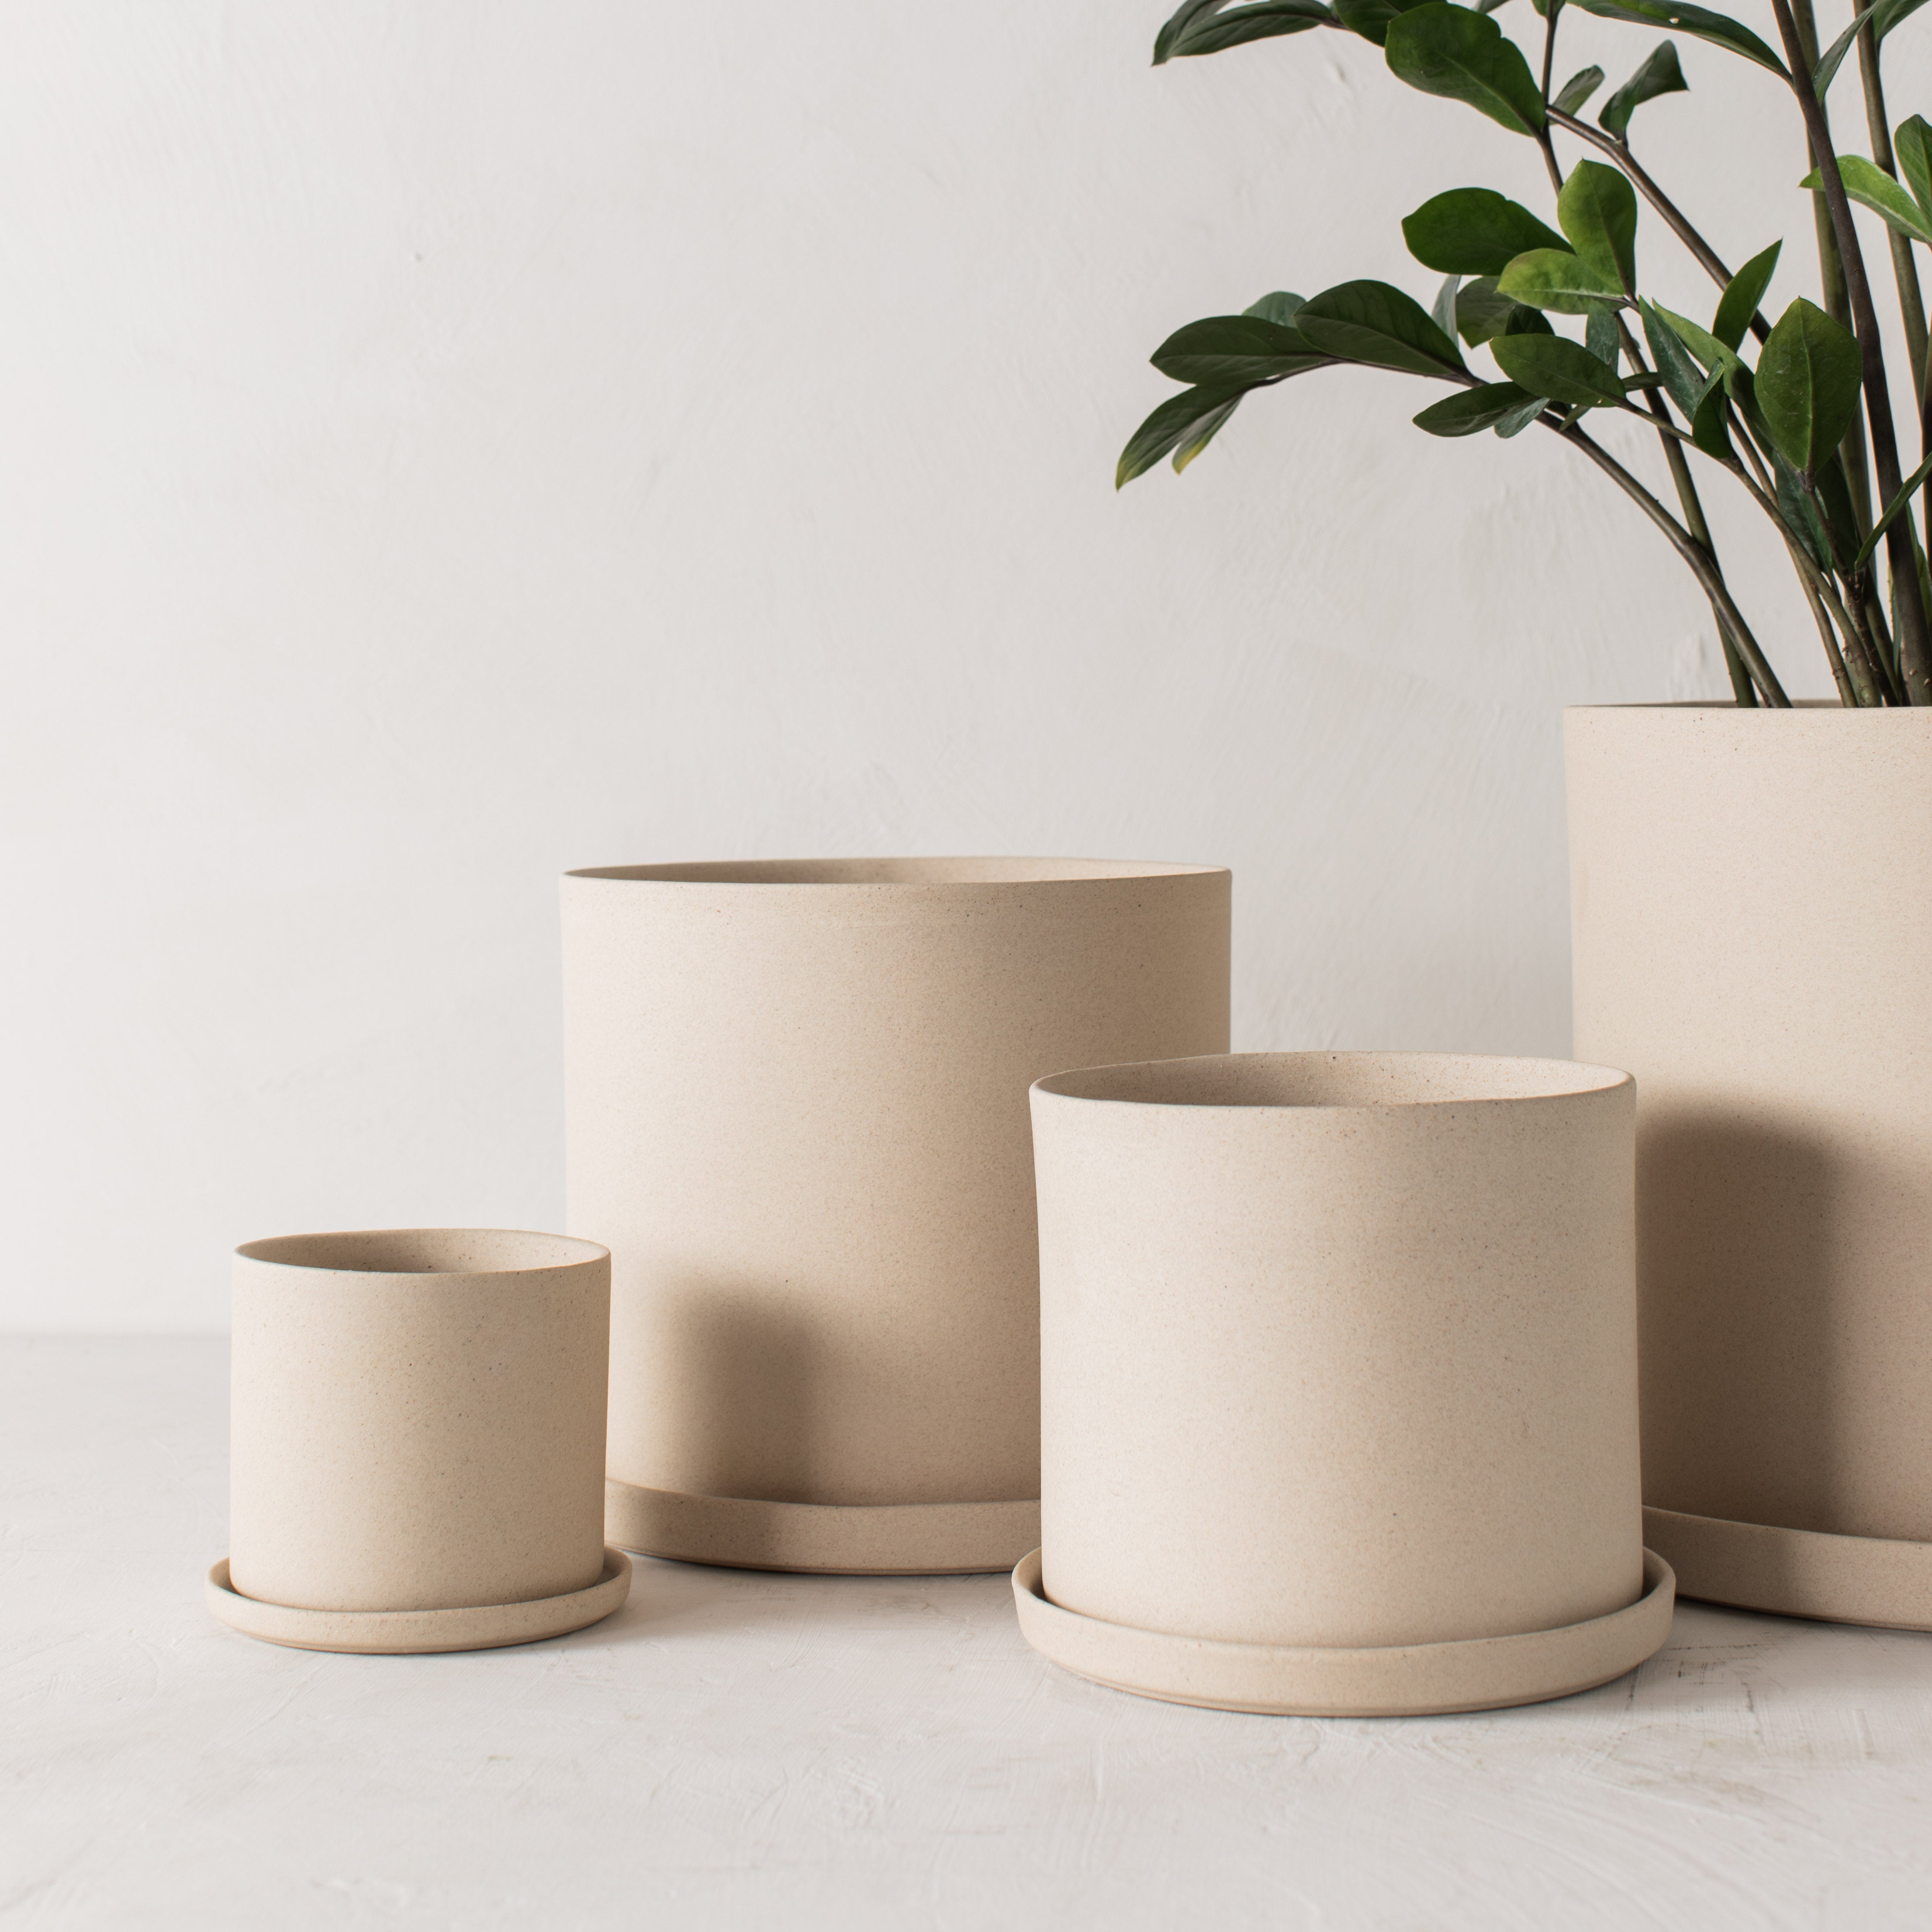 Four stoneware ceramic planters with bottom drainage dishes, 4, 6, 8, and 10 inches. Staged on a white plaster textured tabletop against a plaster textured white wall. Large tall zz plant inside the 10 inch. Designed and sold by Convivial Production, Kansas City Ceramics. 